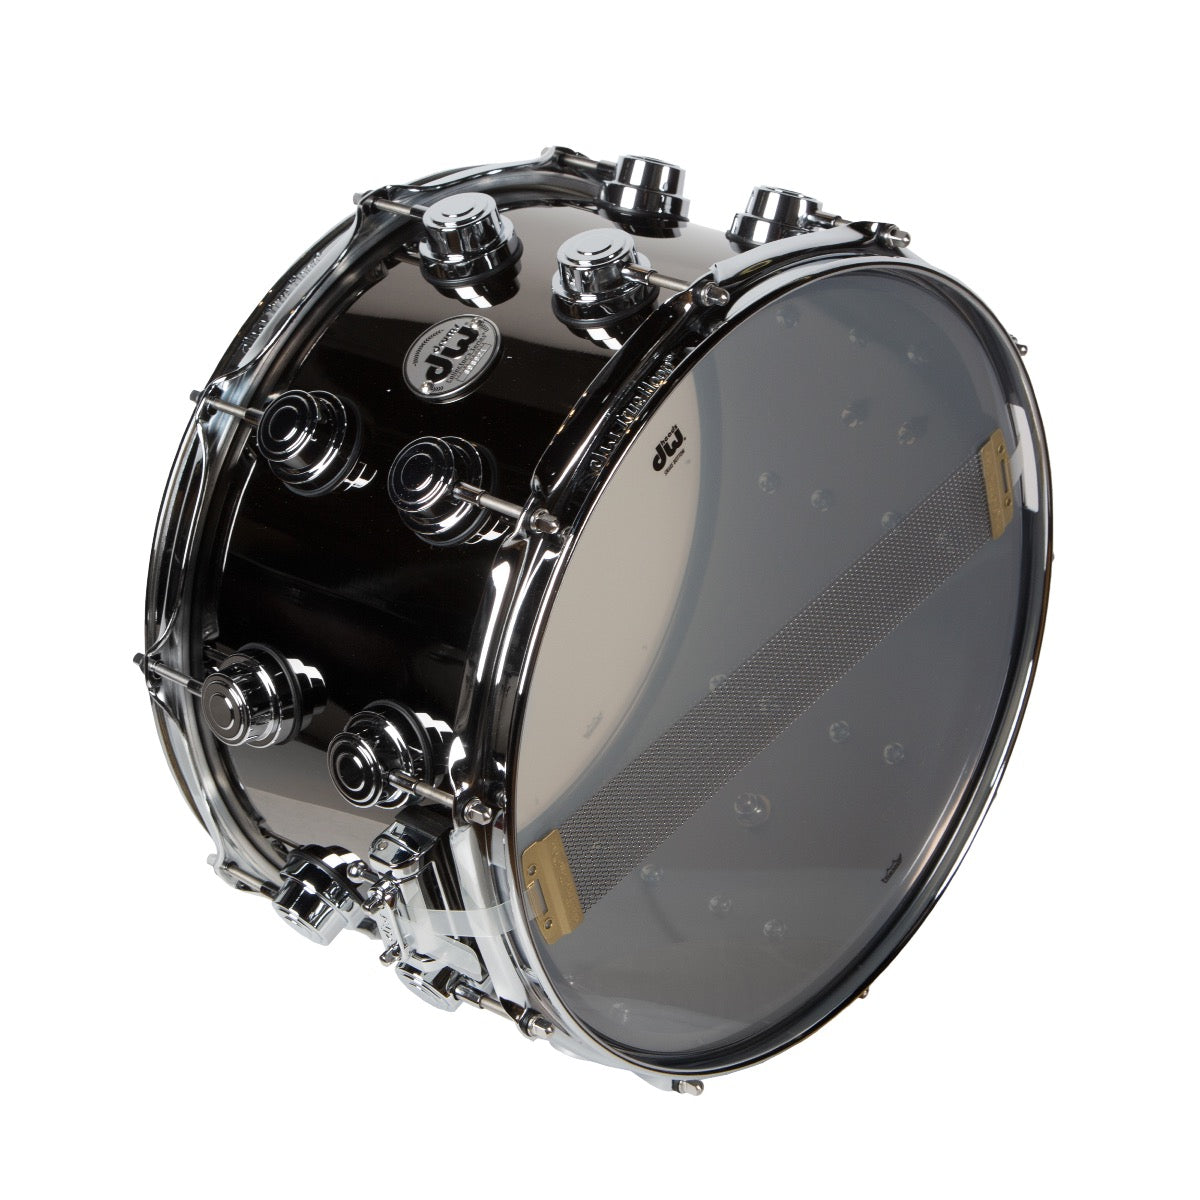 DW 14x8 Collectors Series Black Nickel Finish on Brass Shell Snare - B-stock